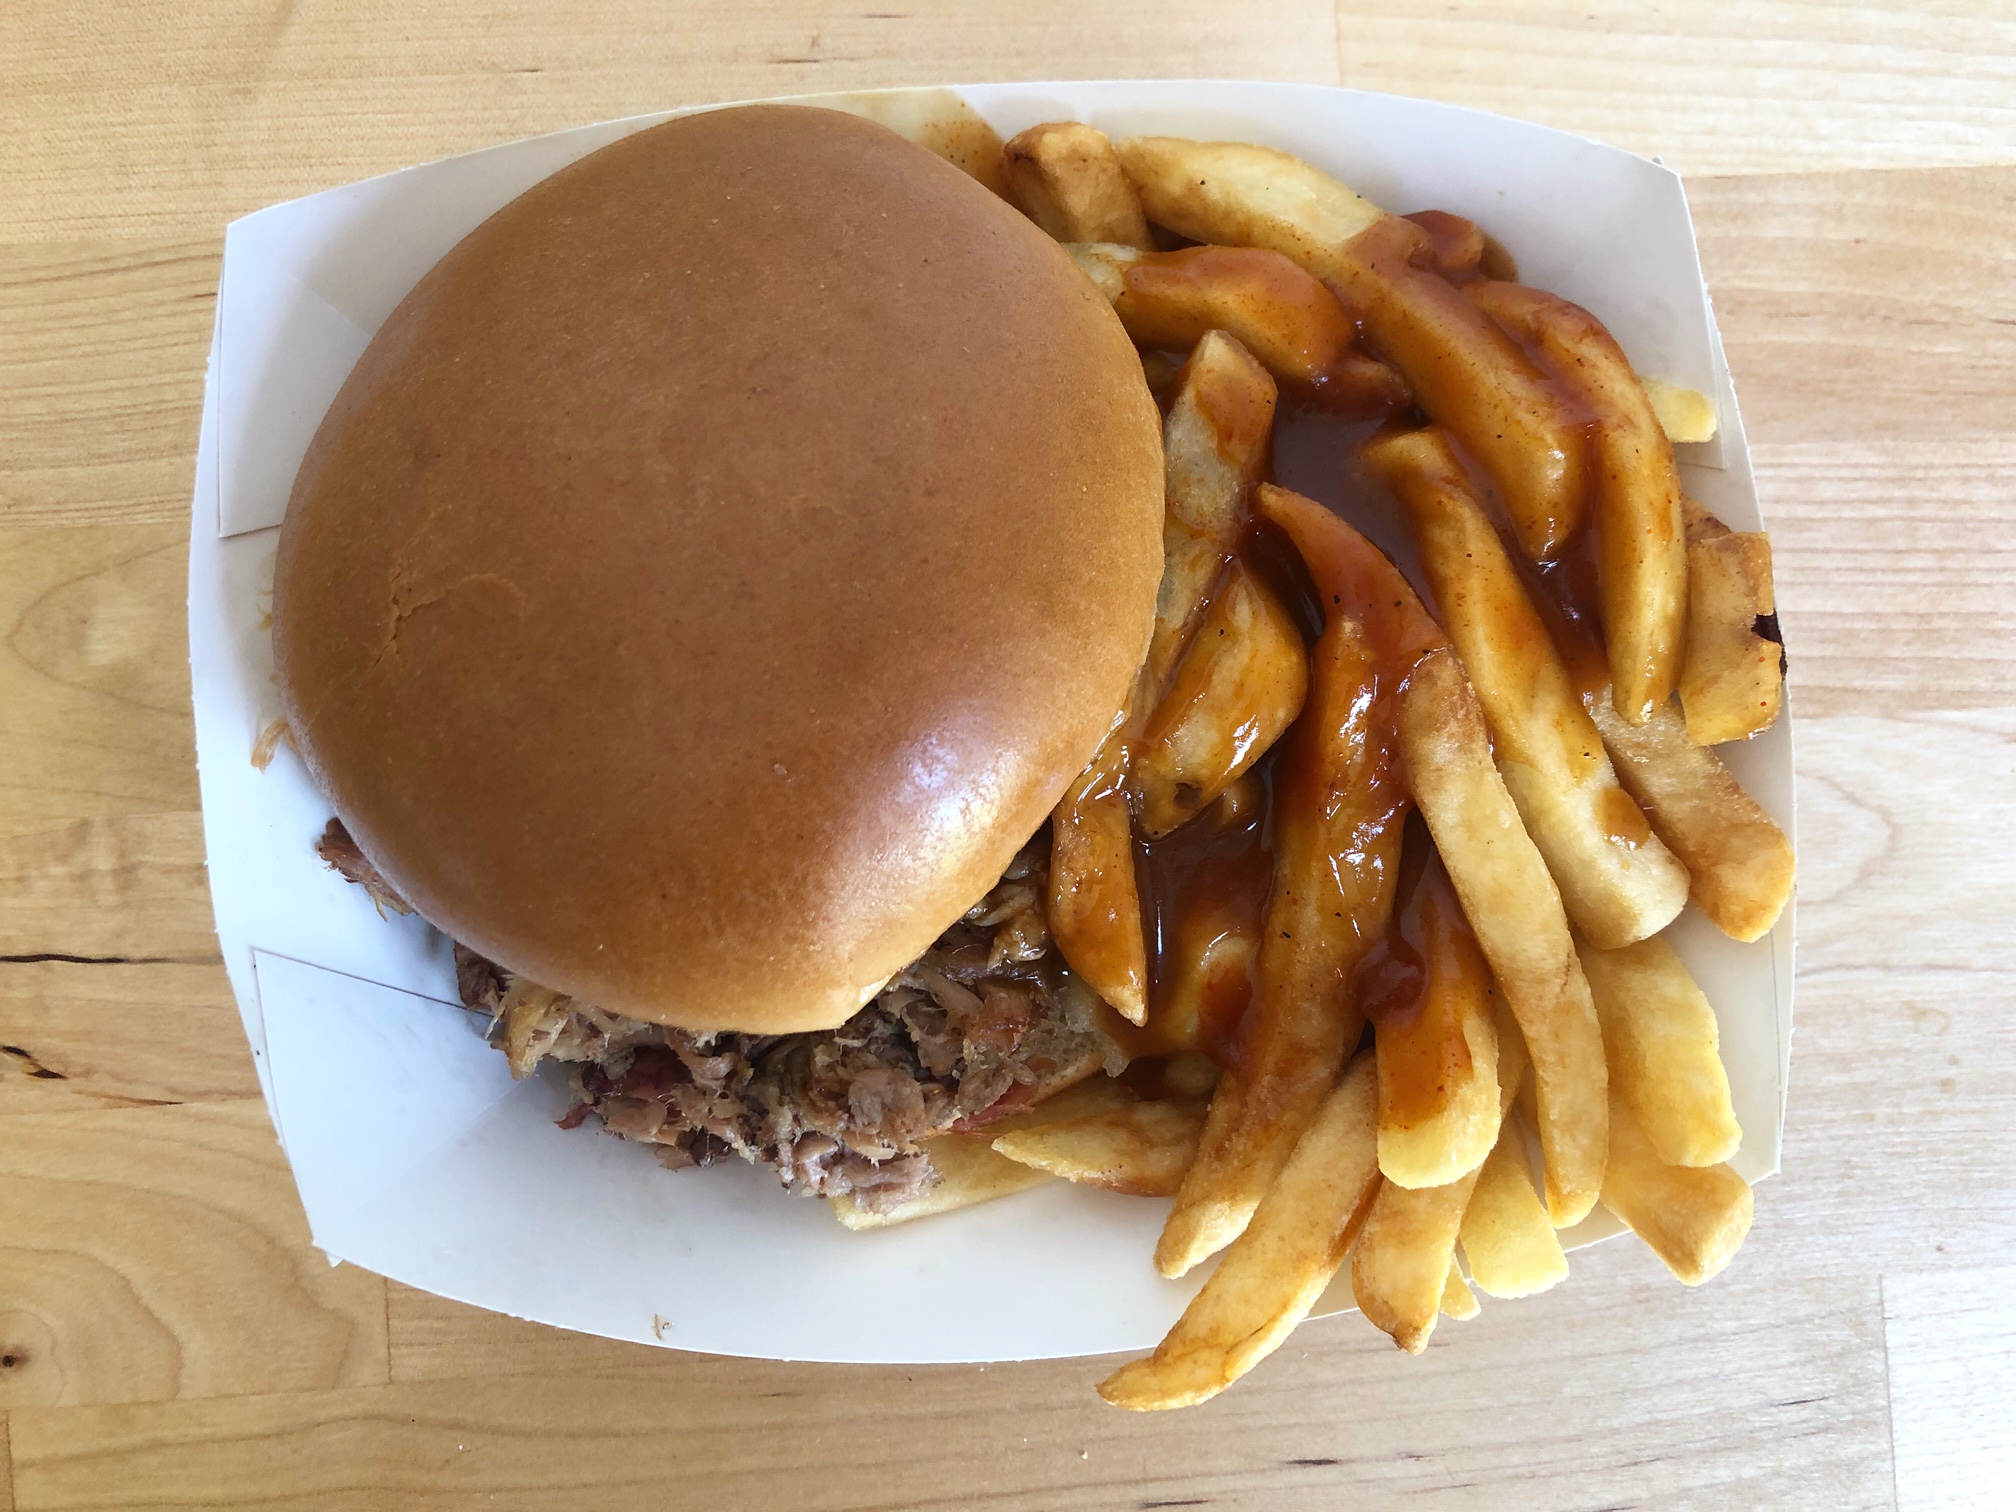 A pulled pork sandwich from Wood N' Hog sits in a white paper tray beside a side of fries doused in barbecue sauce. Photo by Alyssa Buckley.